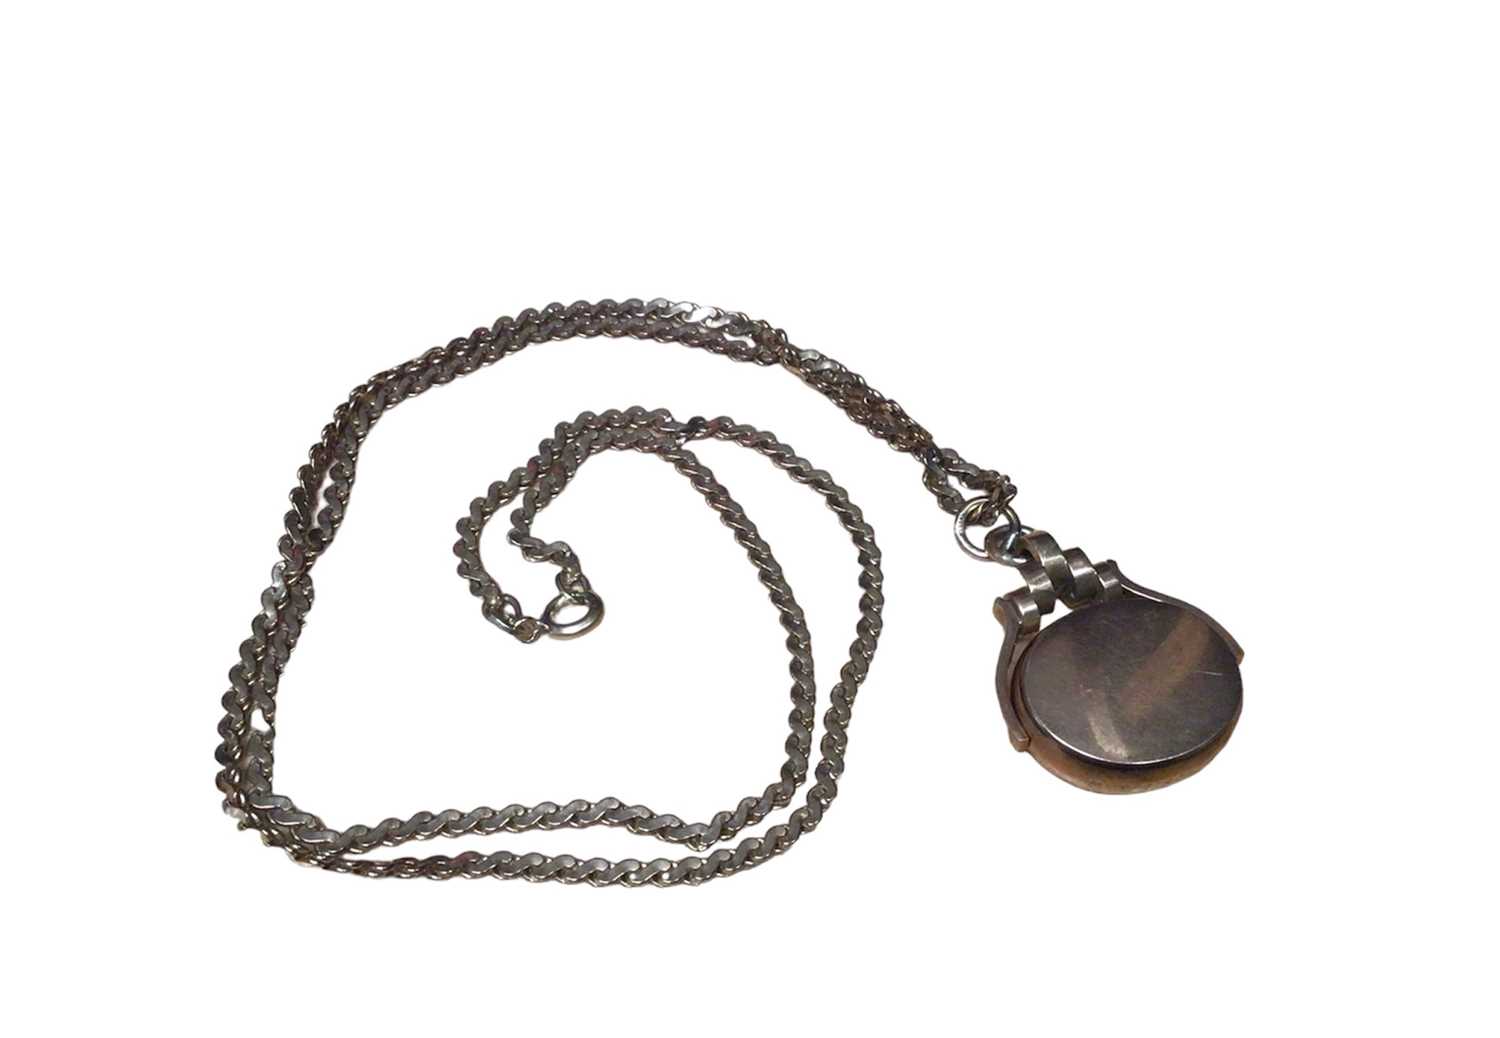 Early 20th century gold mounted agate revolving fob pendant on a modern 9ct gold chain - Image 2 of 3